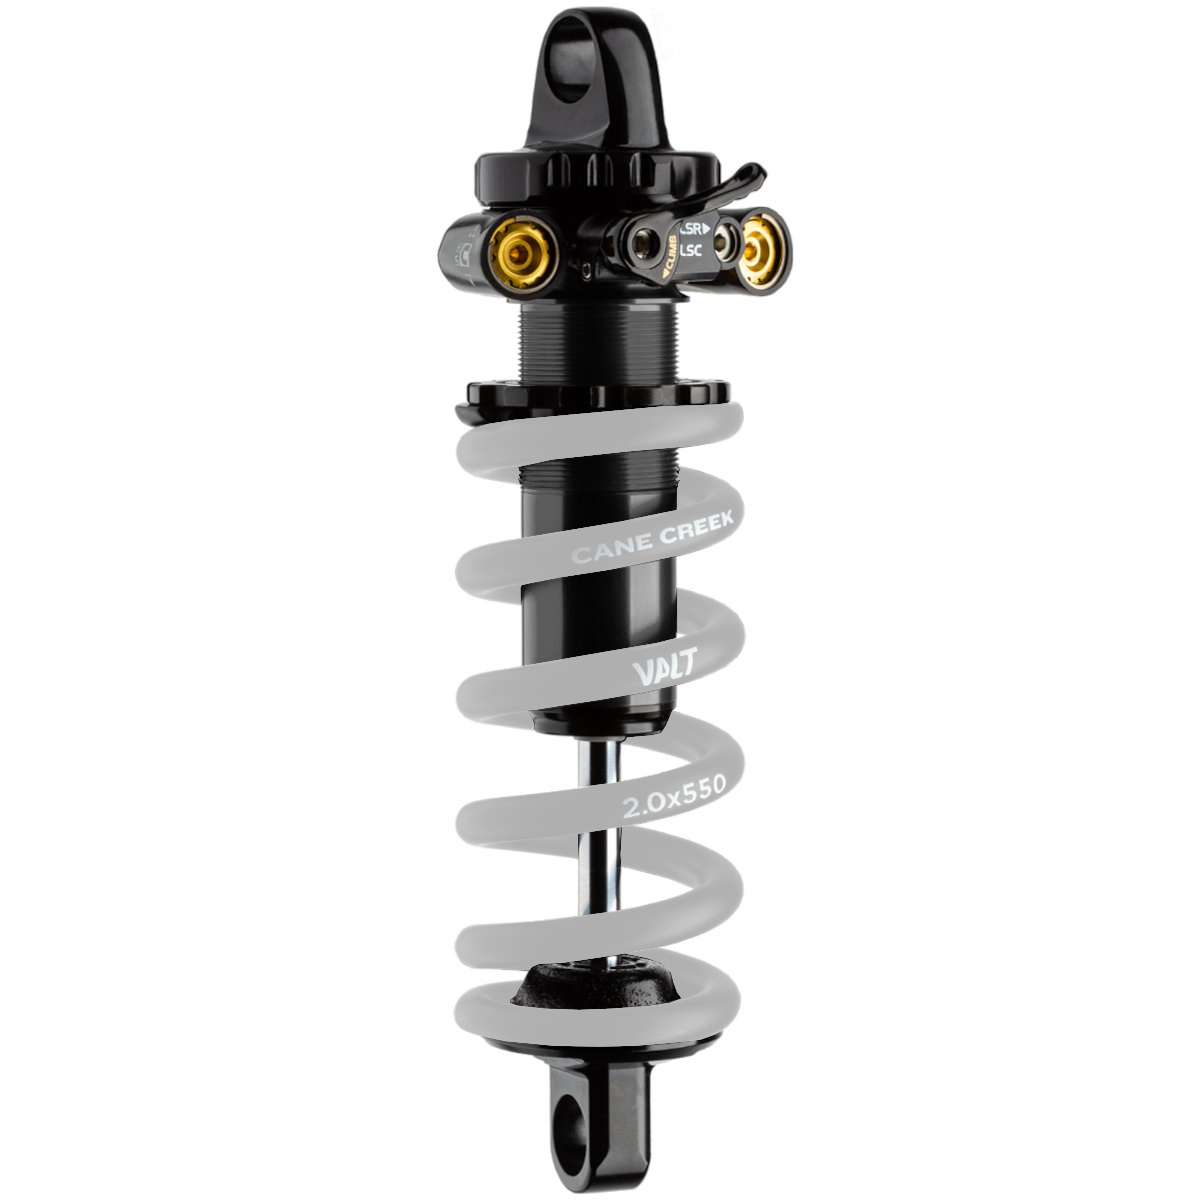 Picture of Cane Creek Double Barrel Coil IL Shock - 15mm Open End Eye - black